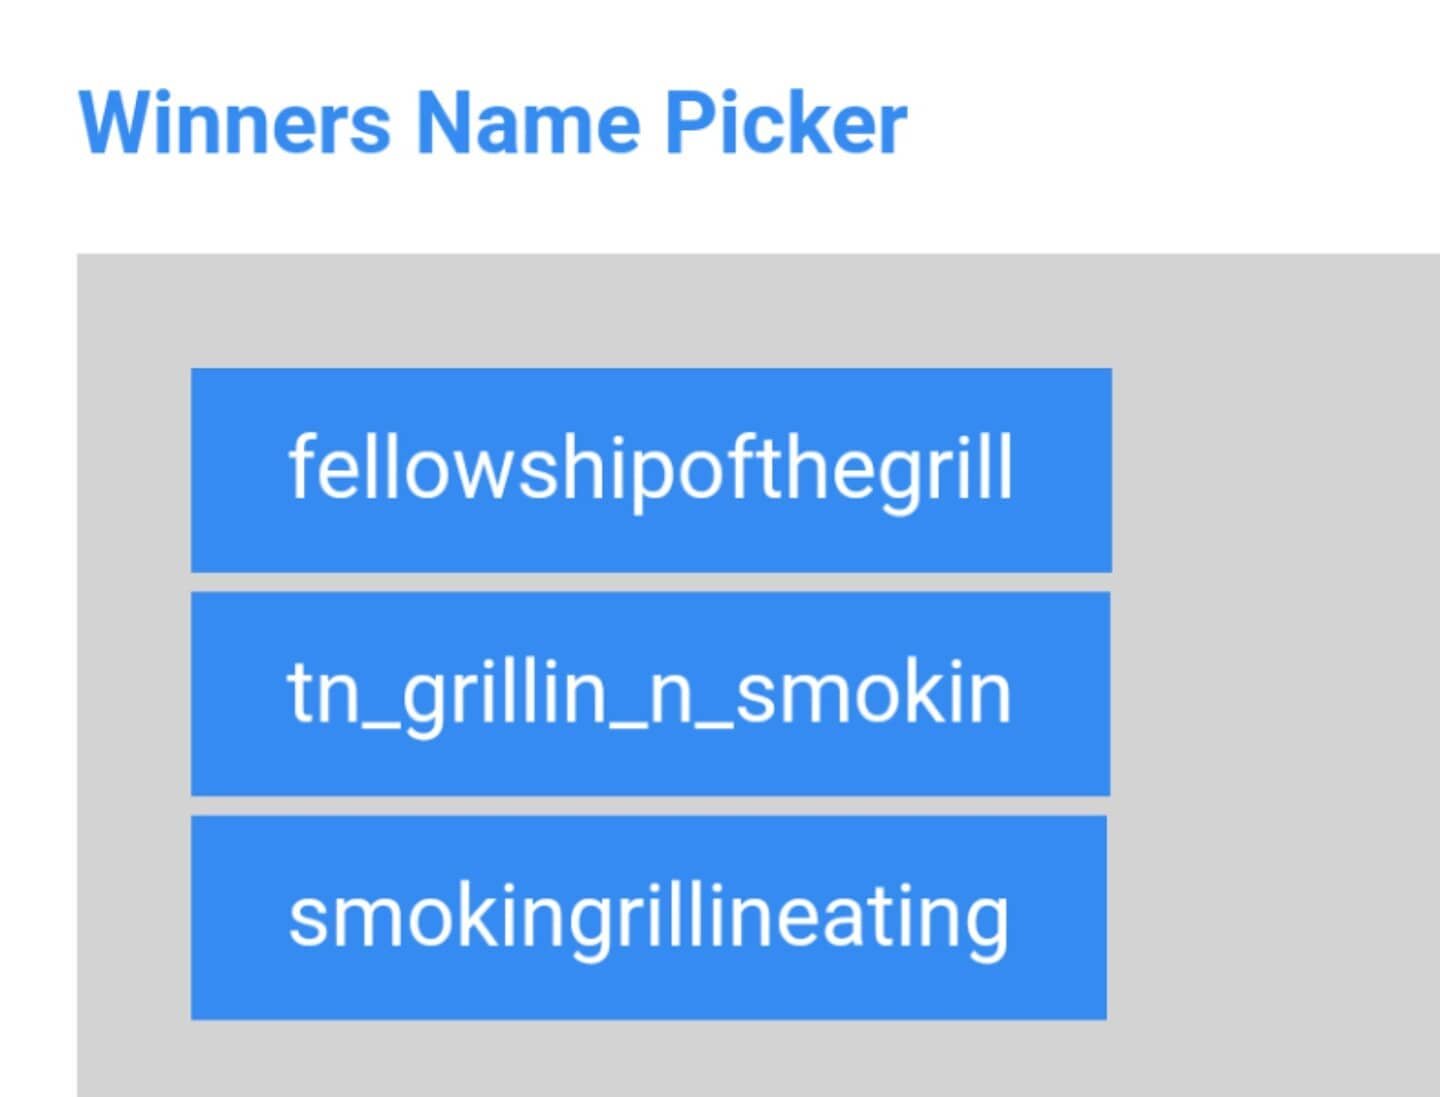 And the winners are in!!! 🙌🏻
.
Congratulations to our winners!!
1st prize: @fellowshipofthegrill 
2nd prize: @tn_grillin_n_smokin (We'll also need your shirt size)
3rd prize: @smokingrillineating 
.
Please DM us your info so we can get these sent o